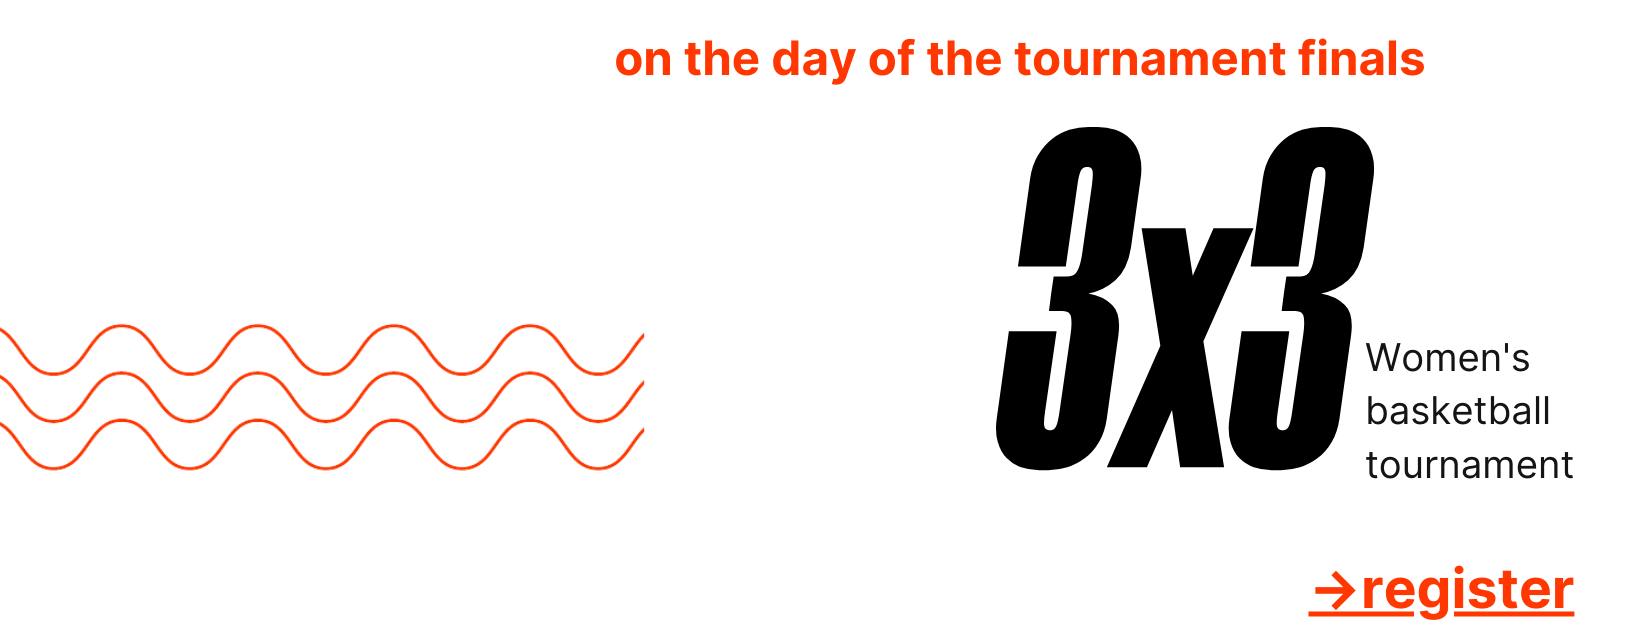 On the day of the tournament finas Women's 3x3 basketball tournament. Register